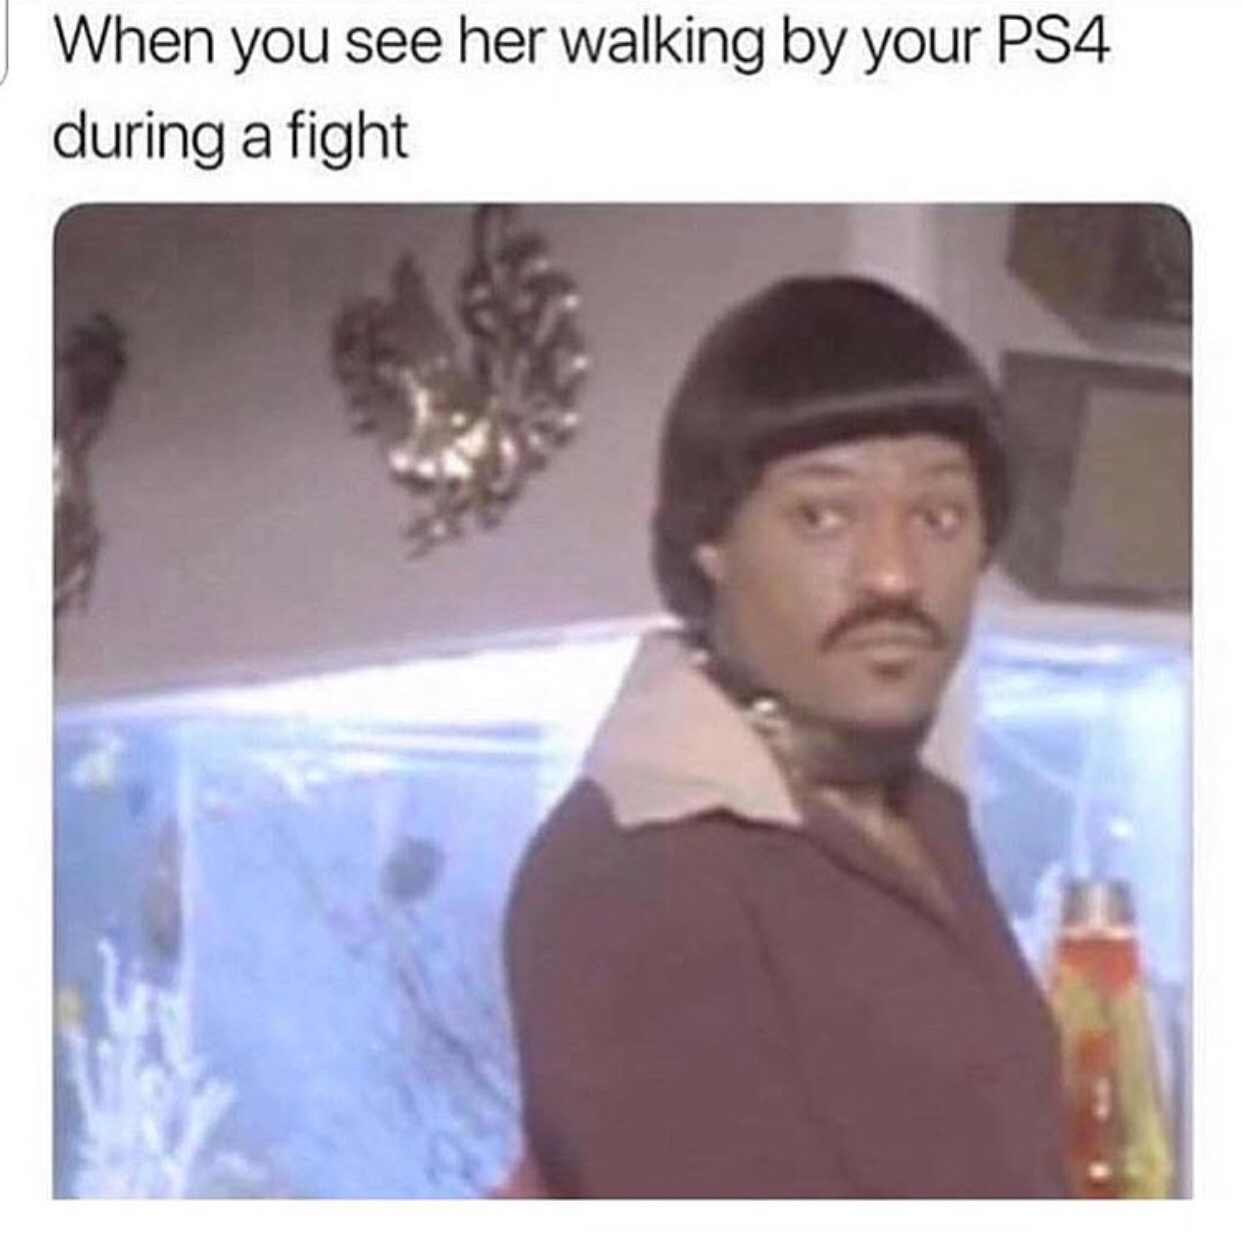 you see her walking by your ps4 during a fight - When you see her walking by your PS4 during a fight